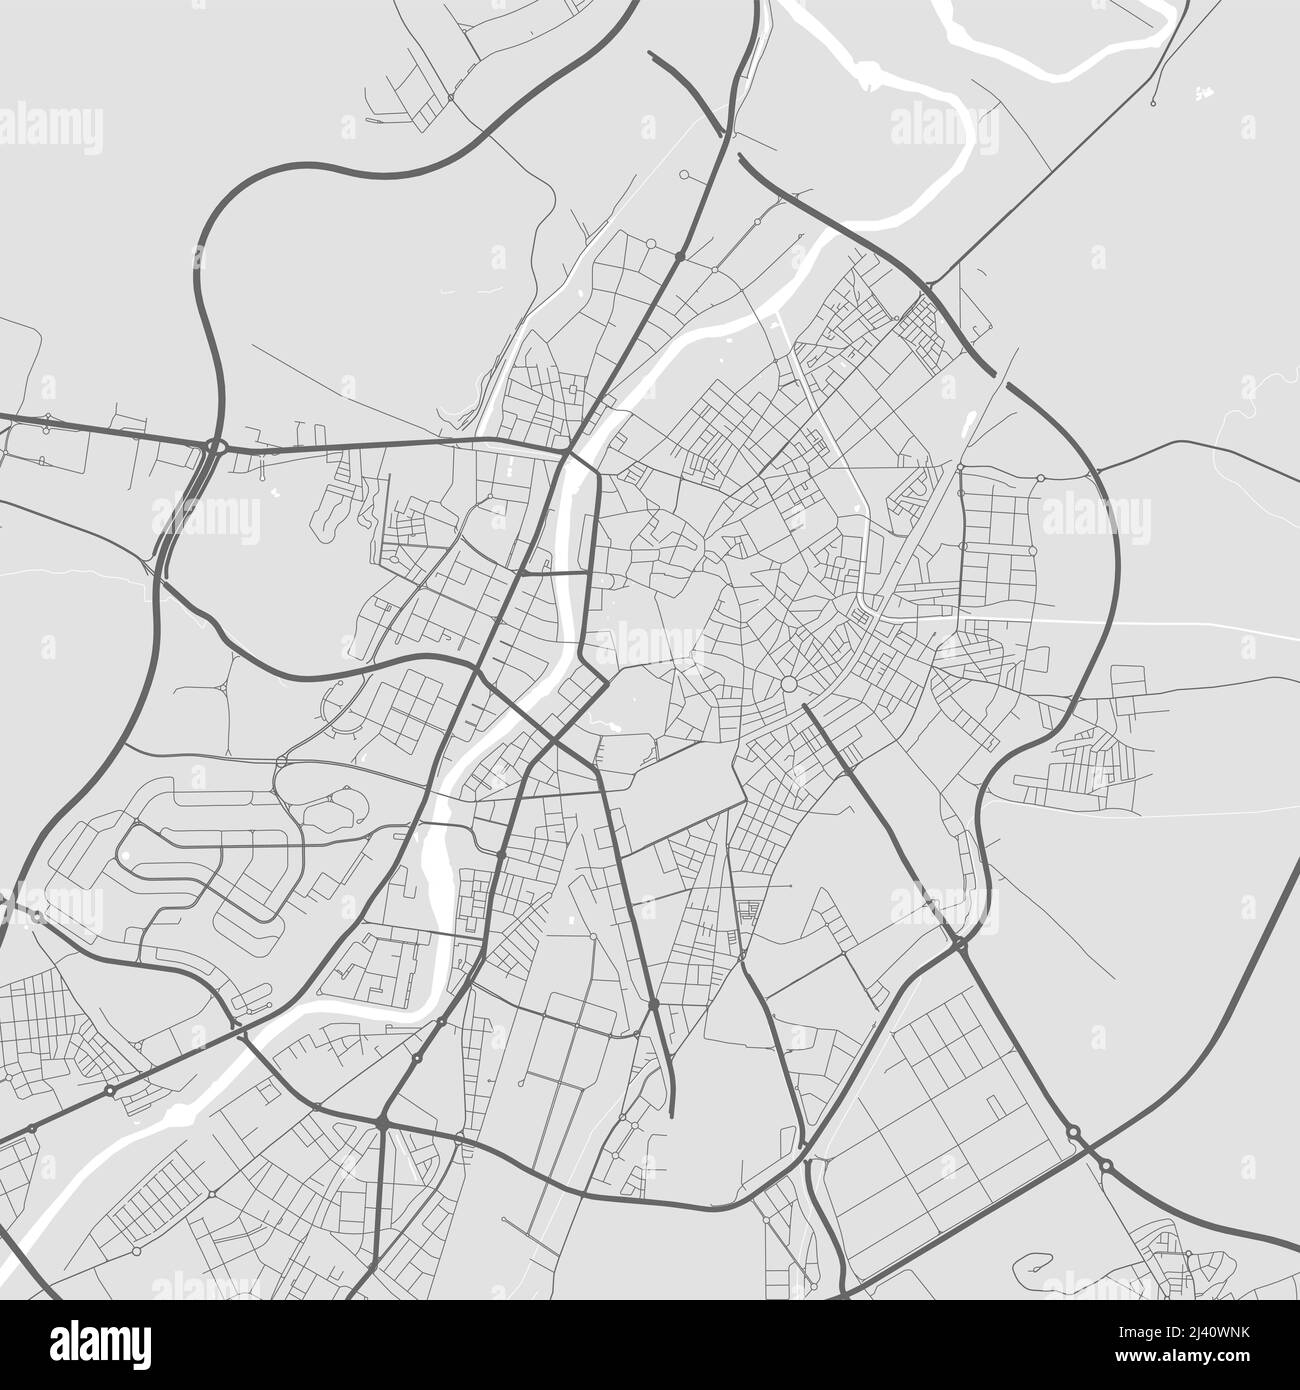 Urban city map of Valladolid. Vector illustration, Valladolid map grayscale art poster. Street map image with roads, metropolitan city area view. Stock Vector